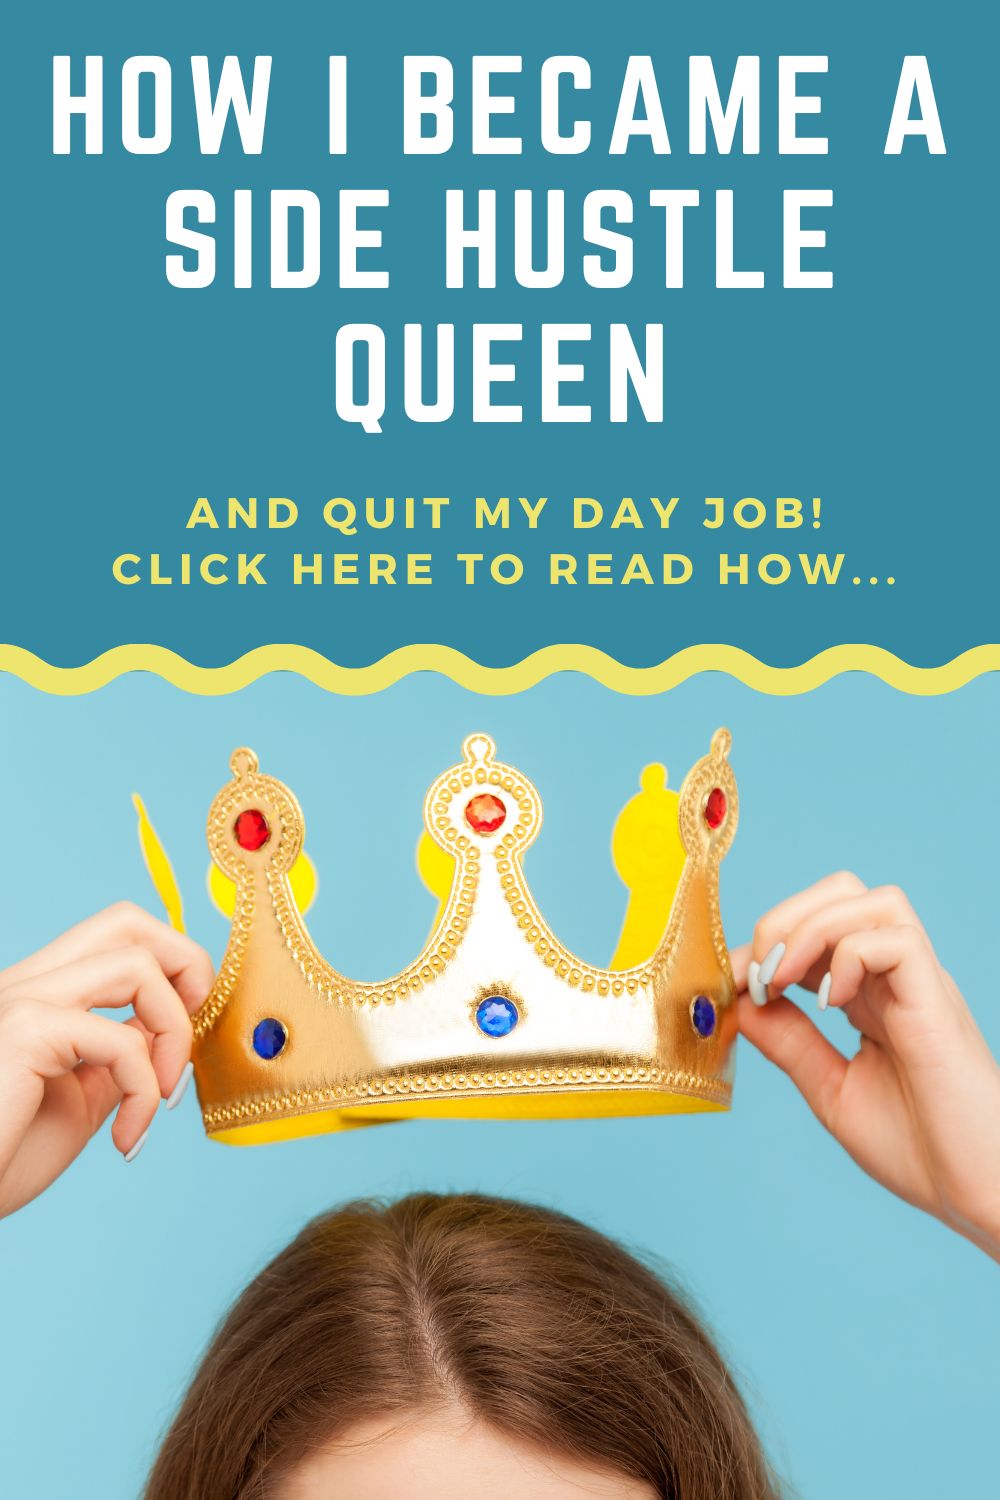 How To Become A Side Hustle Queen